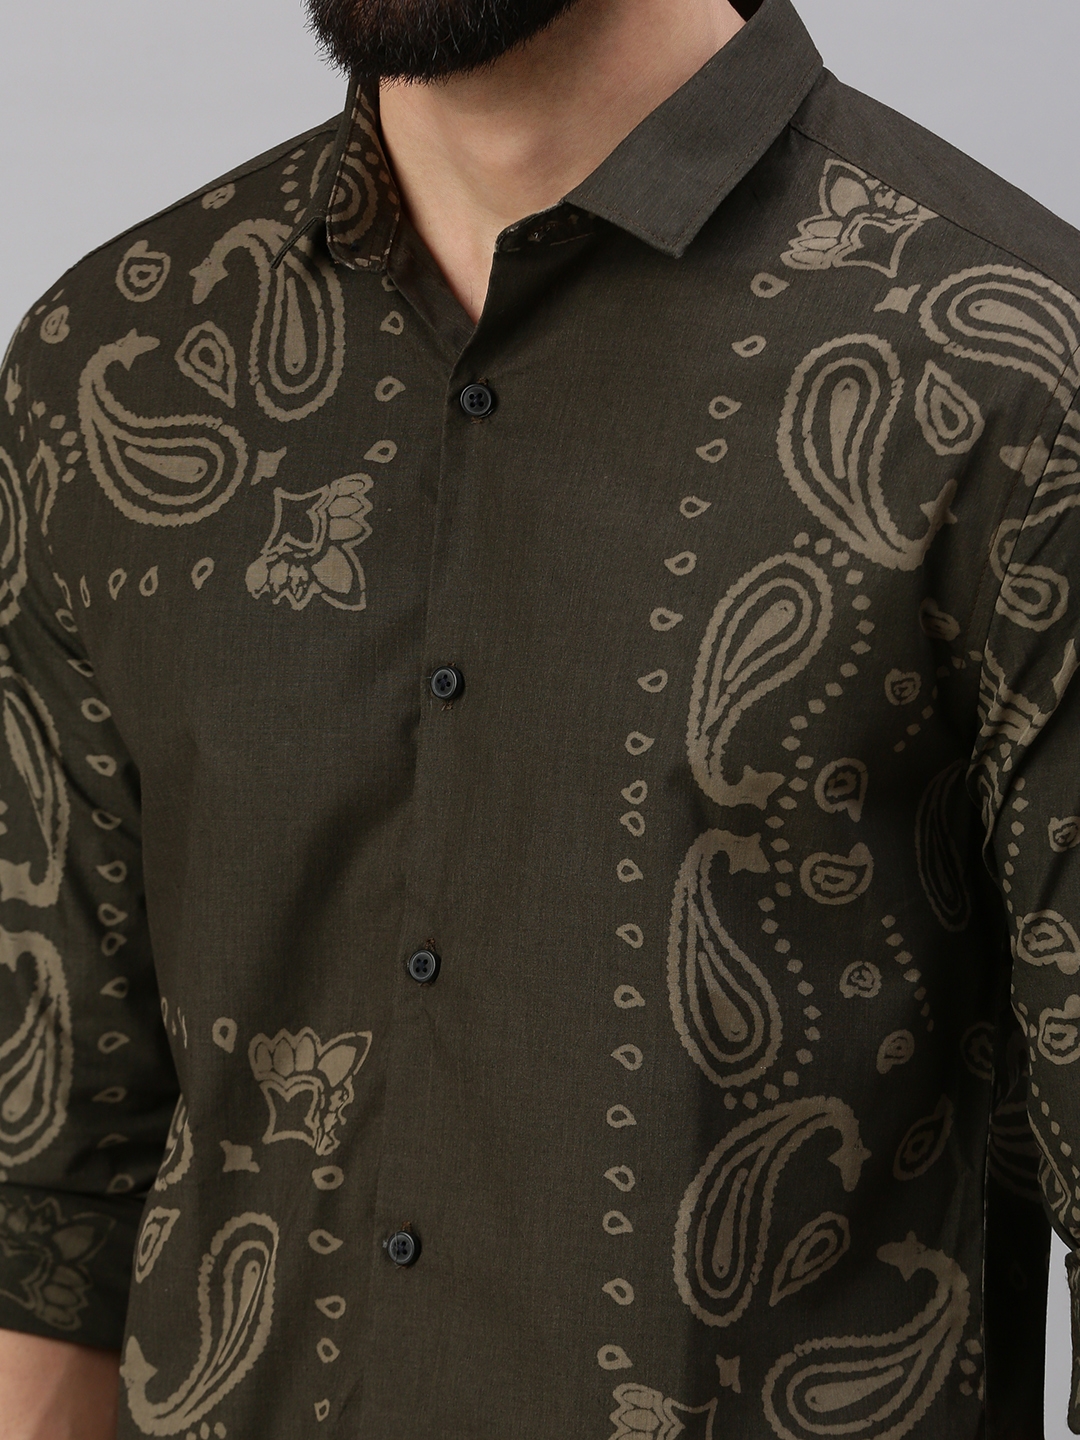 Men's Brown Cotton Printed Casual Shirts